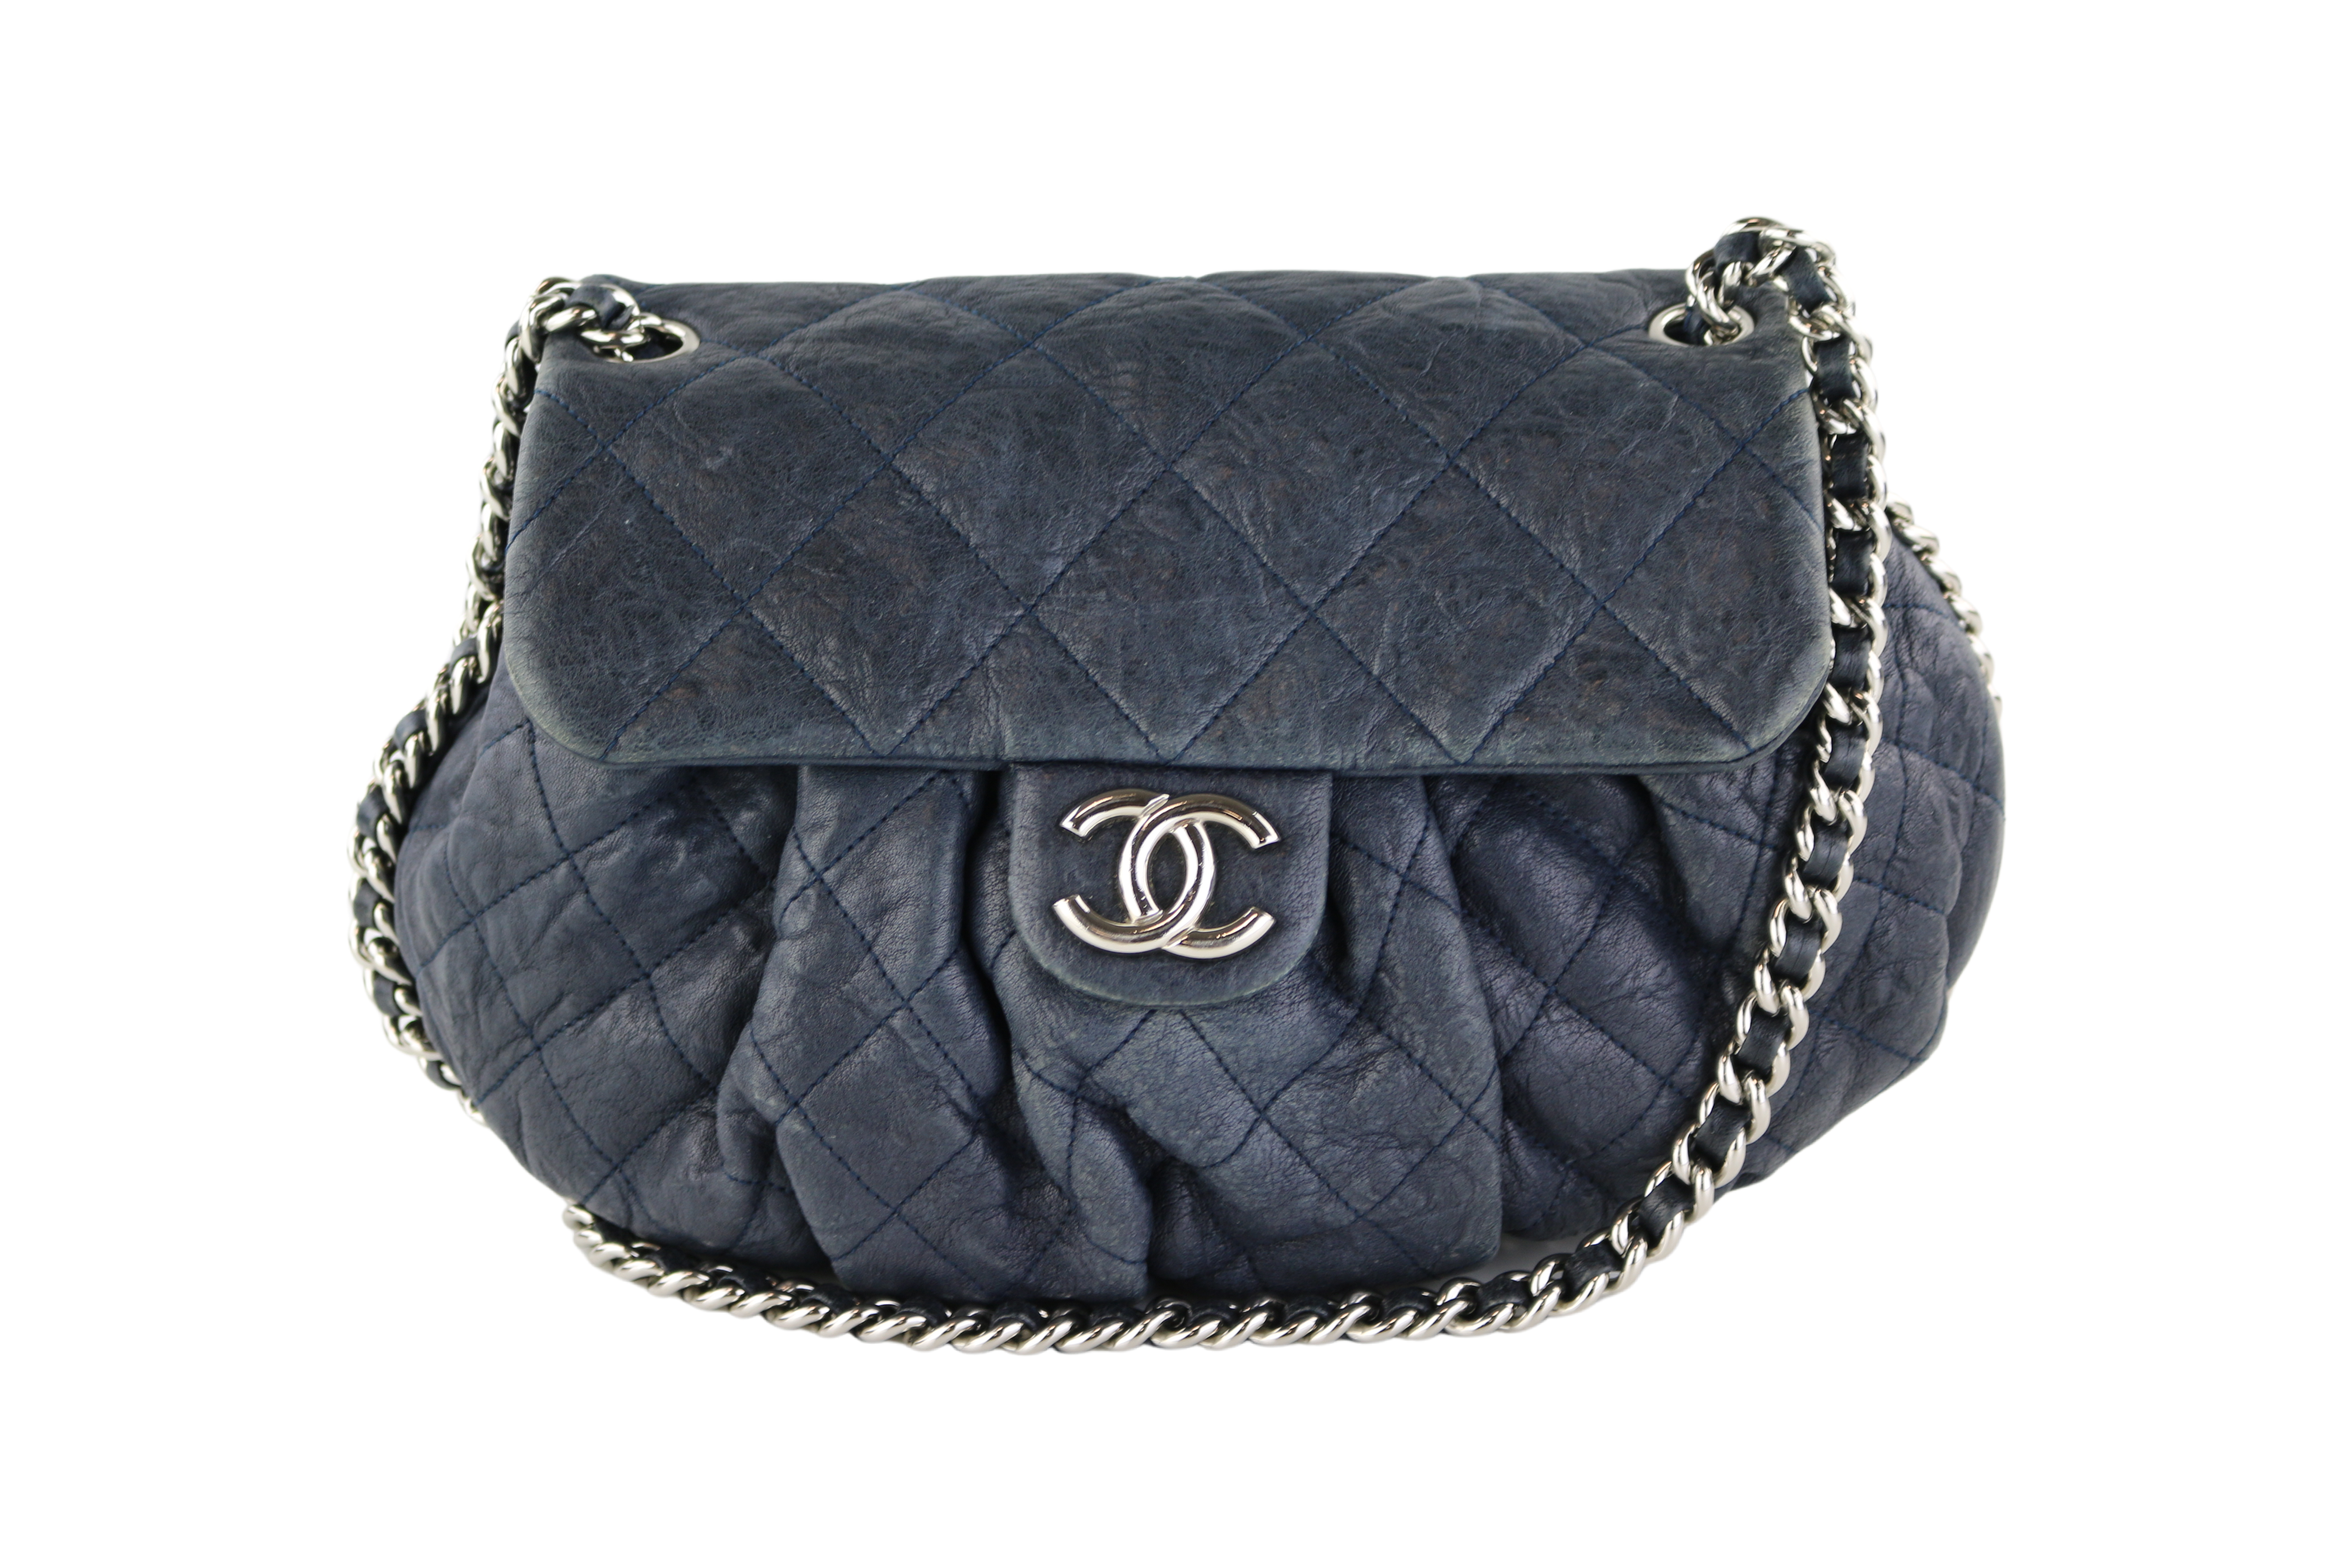 Chanel Red Quilted Leather Chain Around Shoulder Bag Chanel